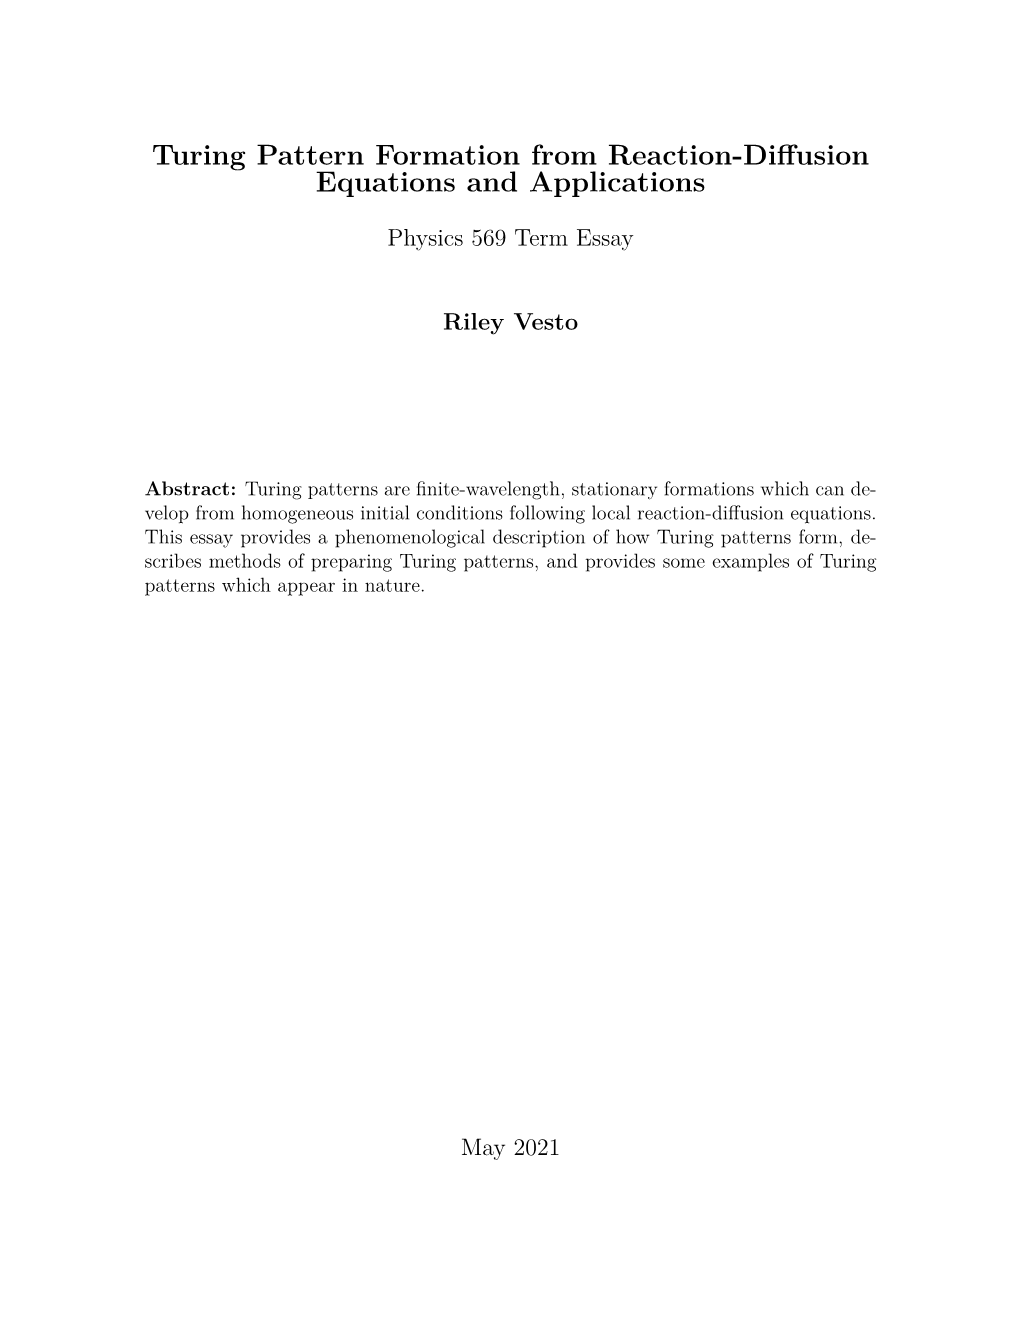 Turing Pattern Formation from Reaction-Diffusion Equations And